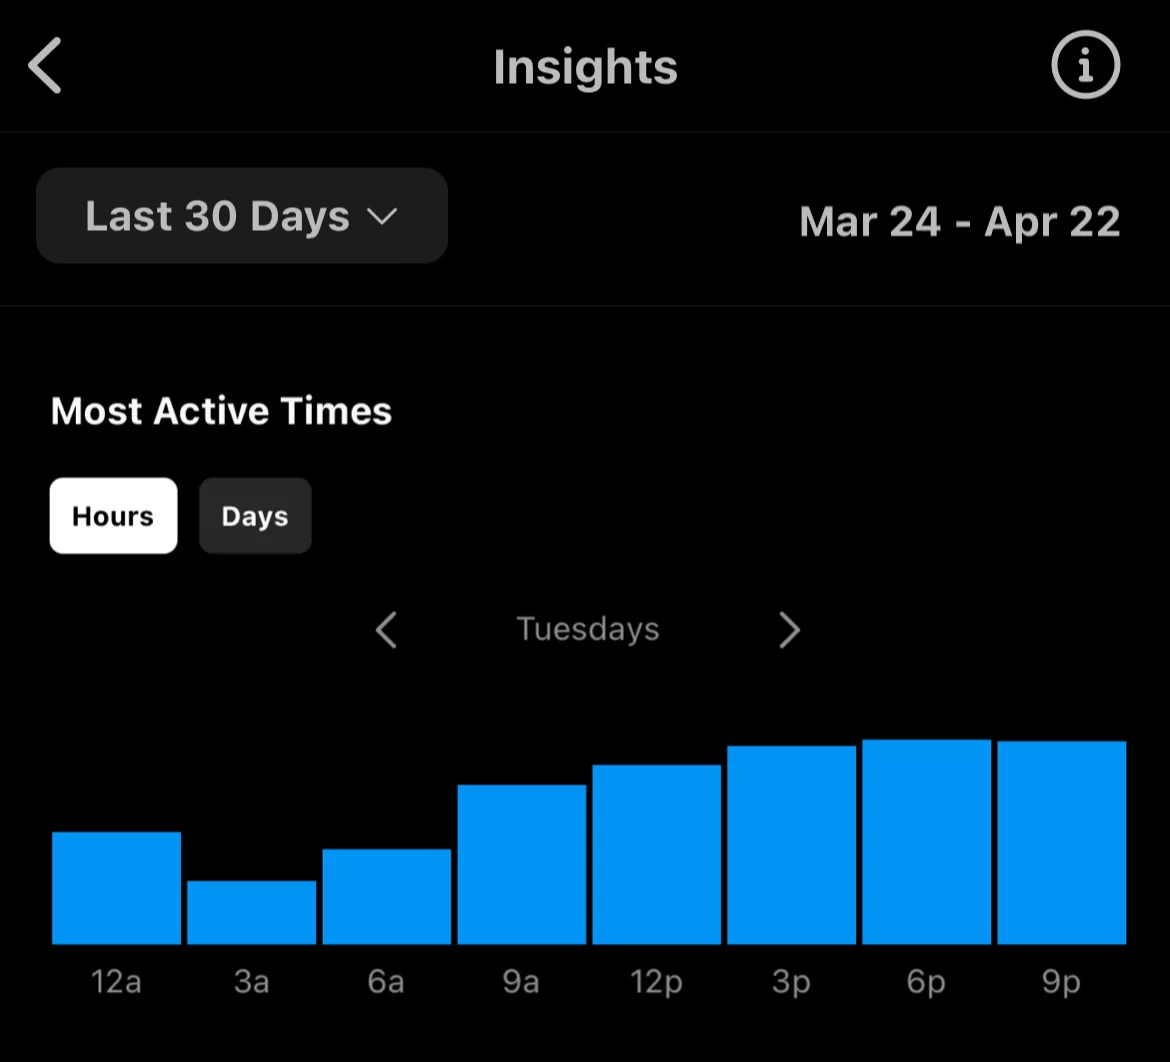 Instagram's built-in analytics on the most active times.